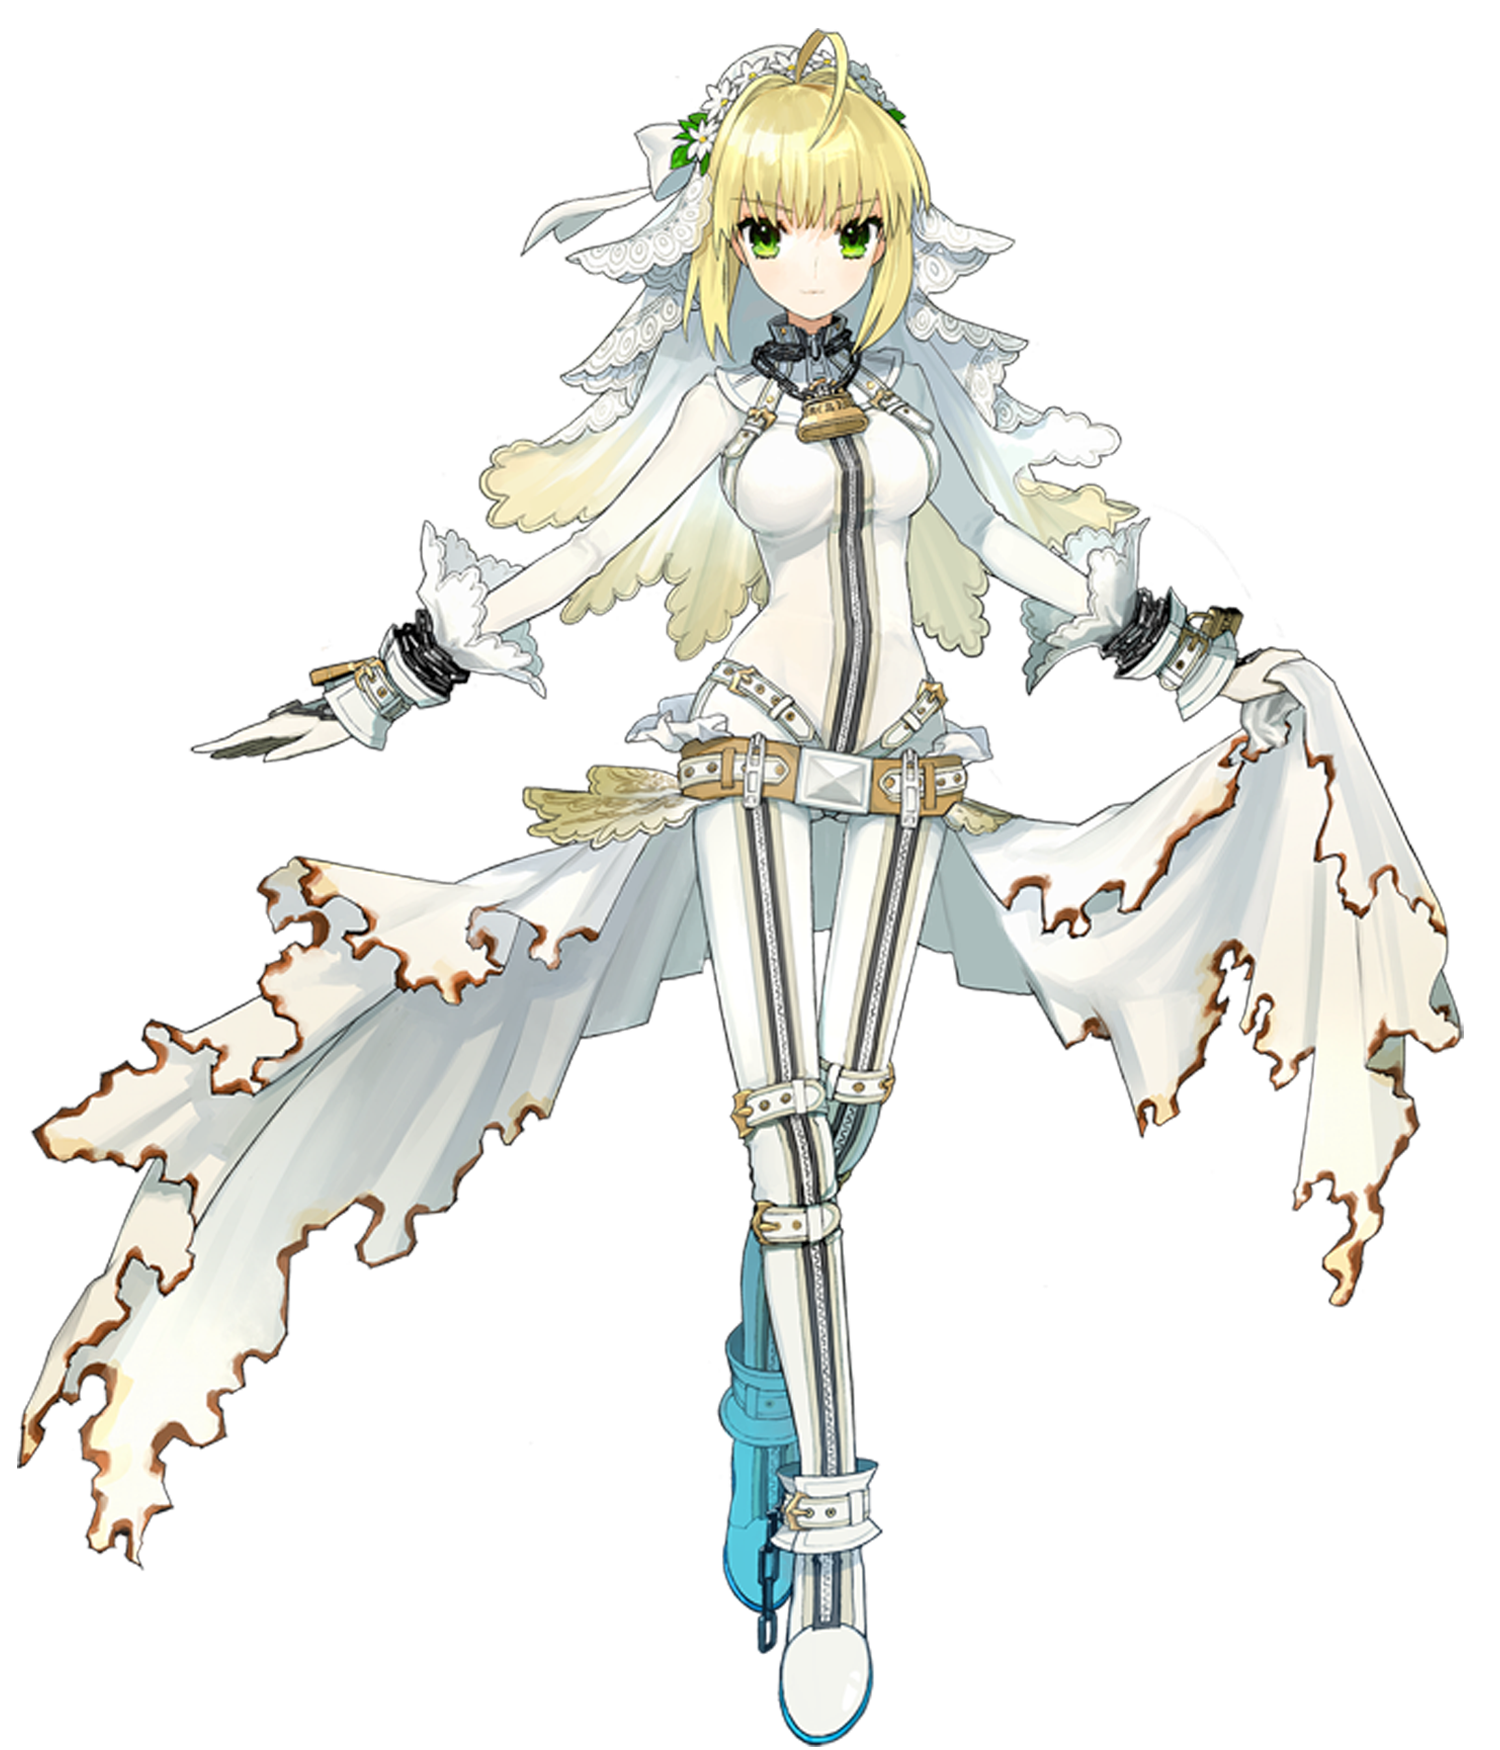 http://img1.wikia.nocookie.net/__cb20130522220040/typemoon/images/d/d0/SaberBride.png